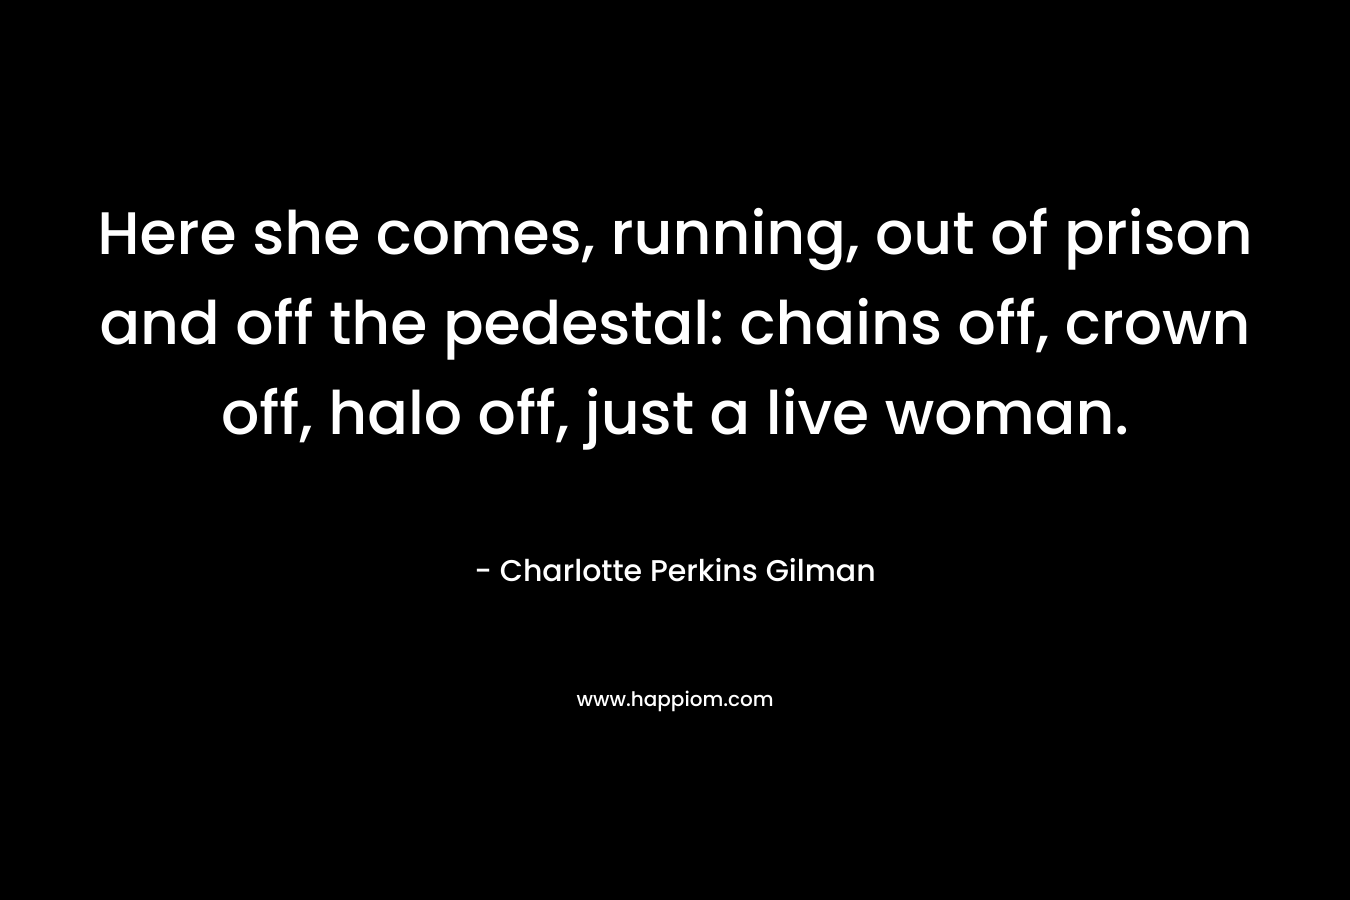 Here she comes, running, out of prison and off the pedestal: chains off, crown off, halo off, just a live woman. – Charlotte Perkins Gilman